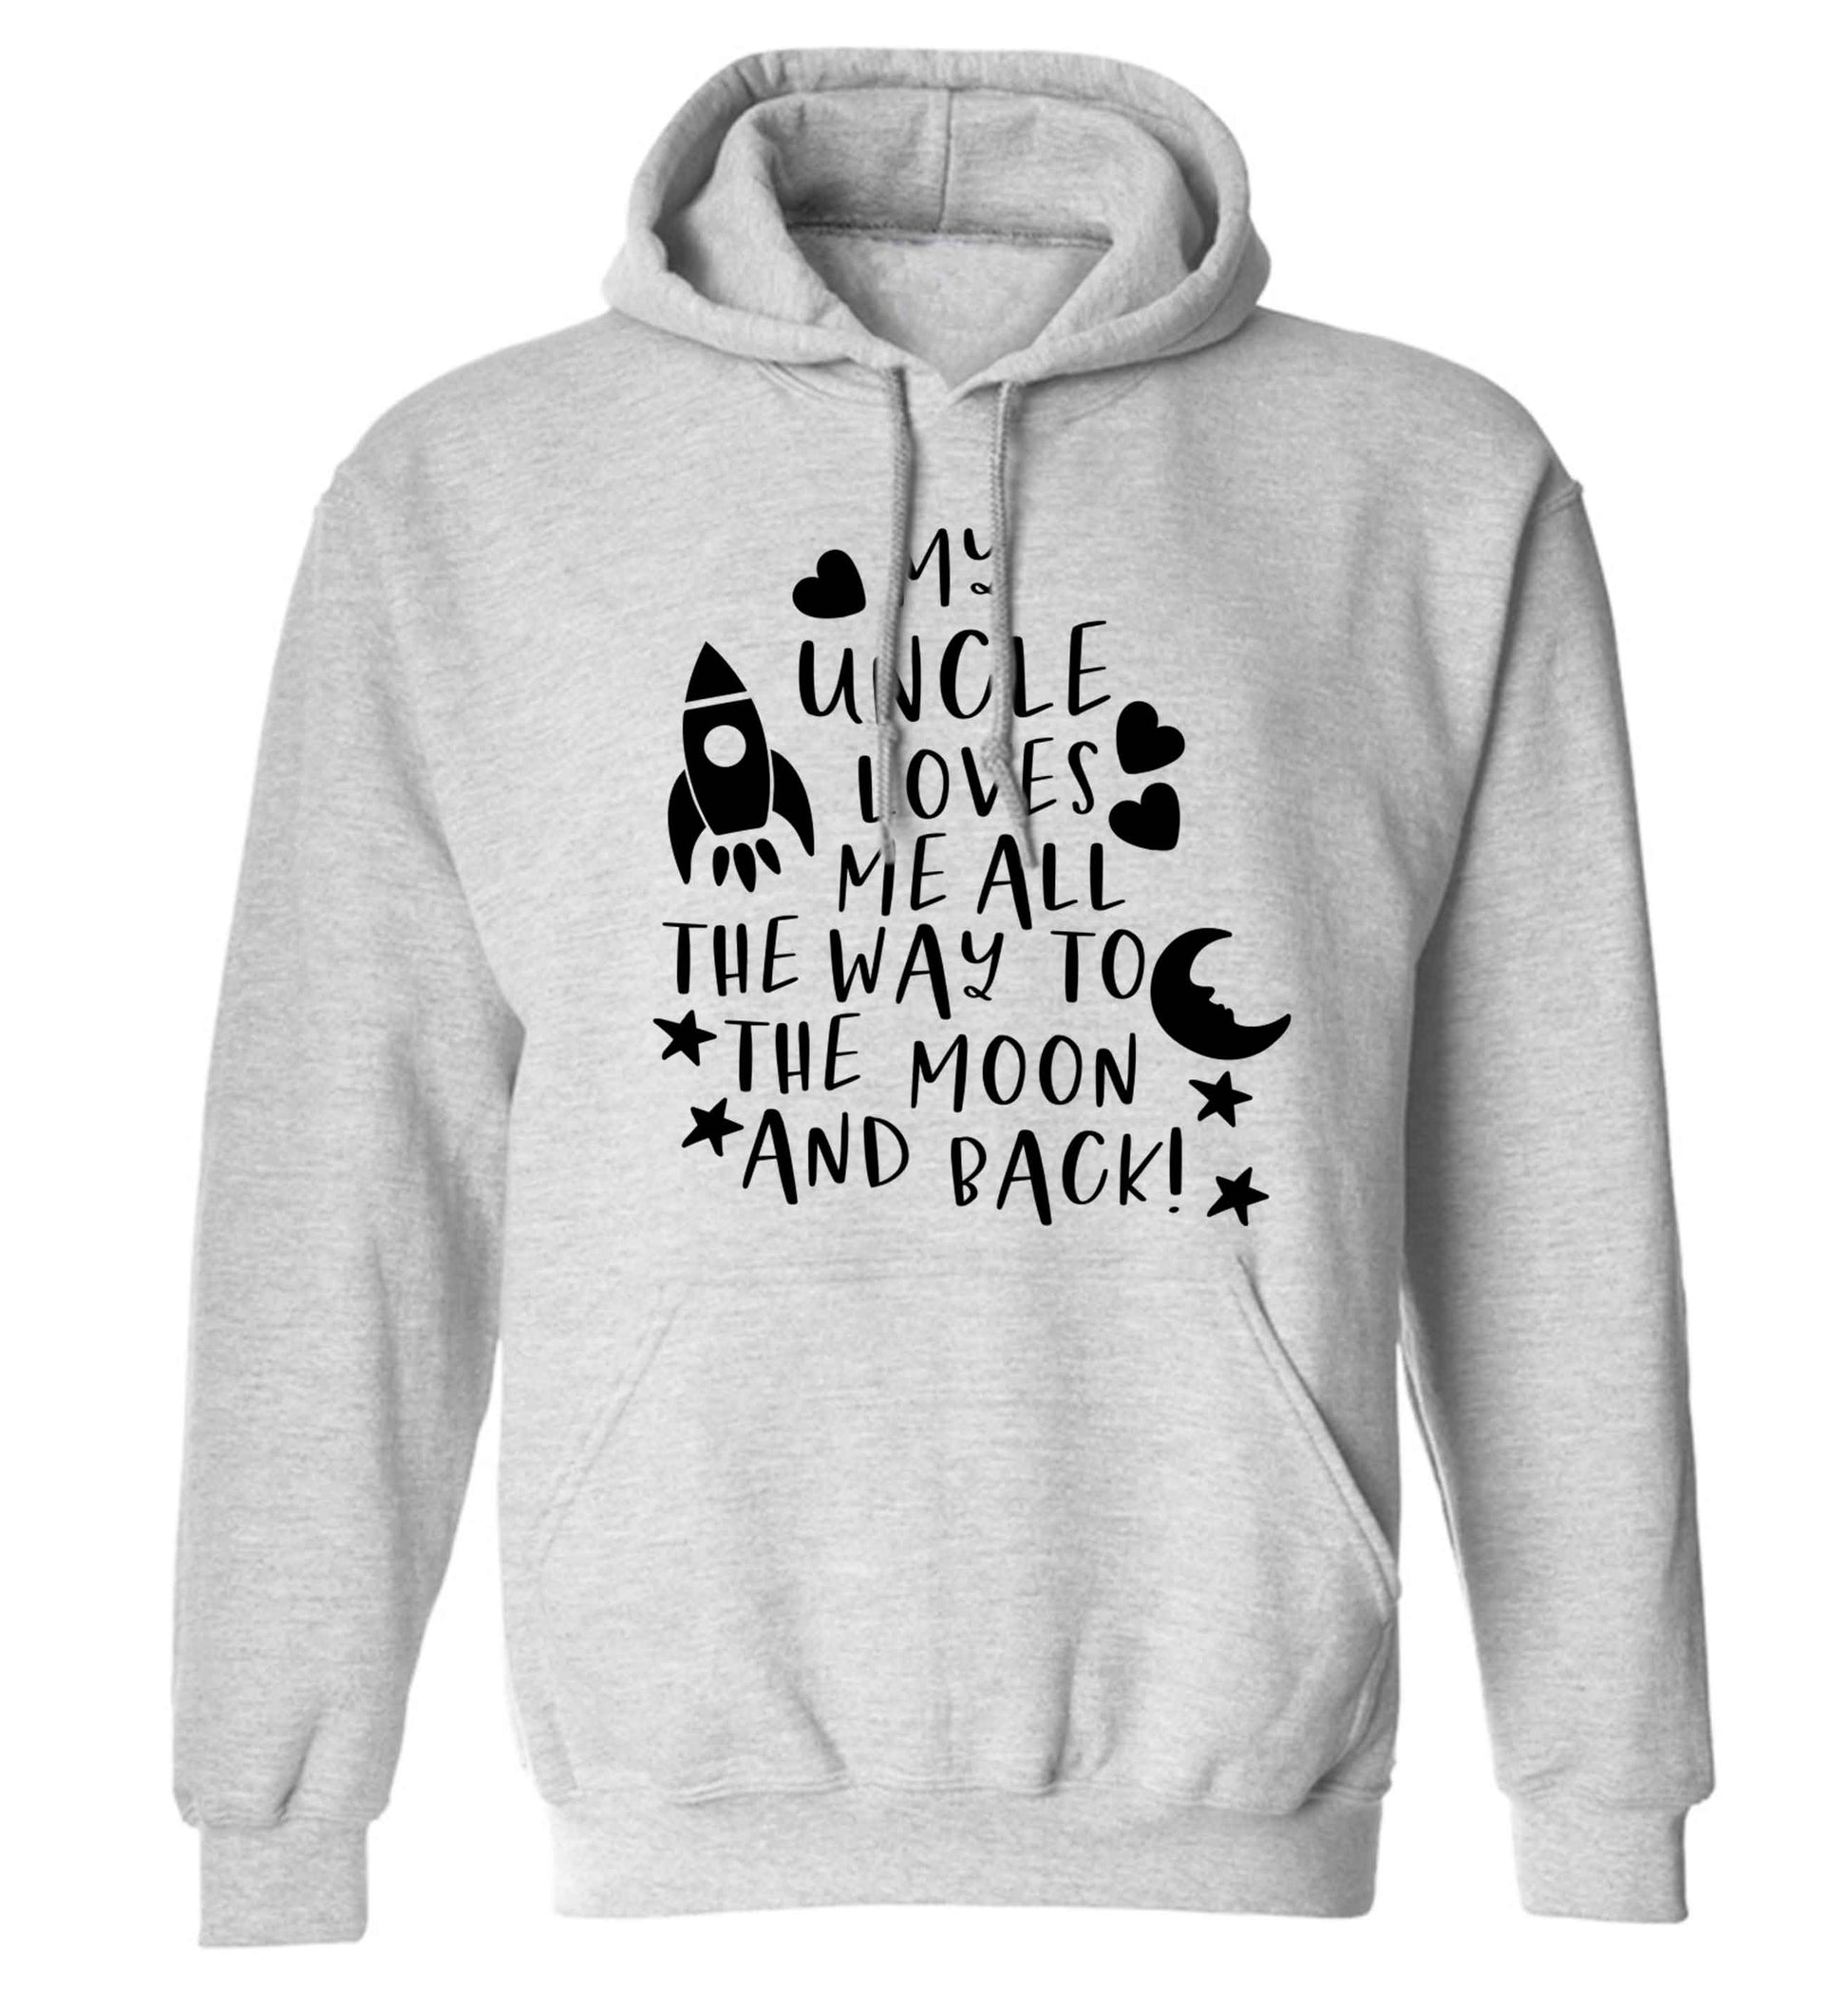 My uncle loves me all the way to the moon and back adults unisex grey hoodie 2XL